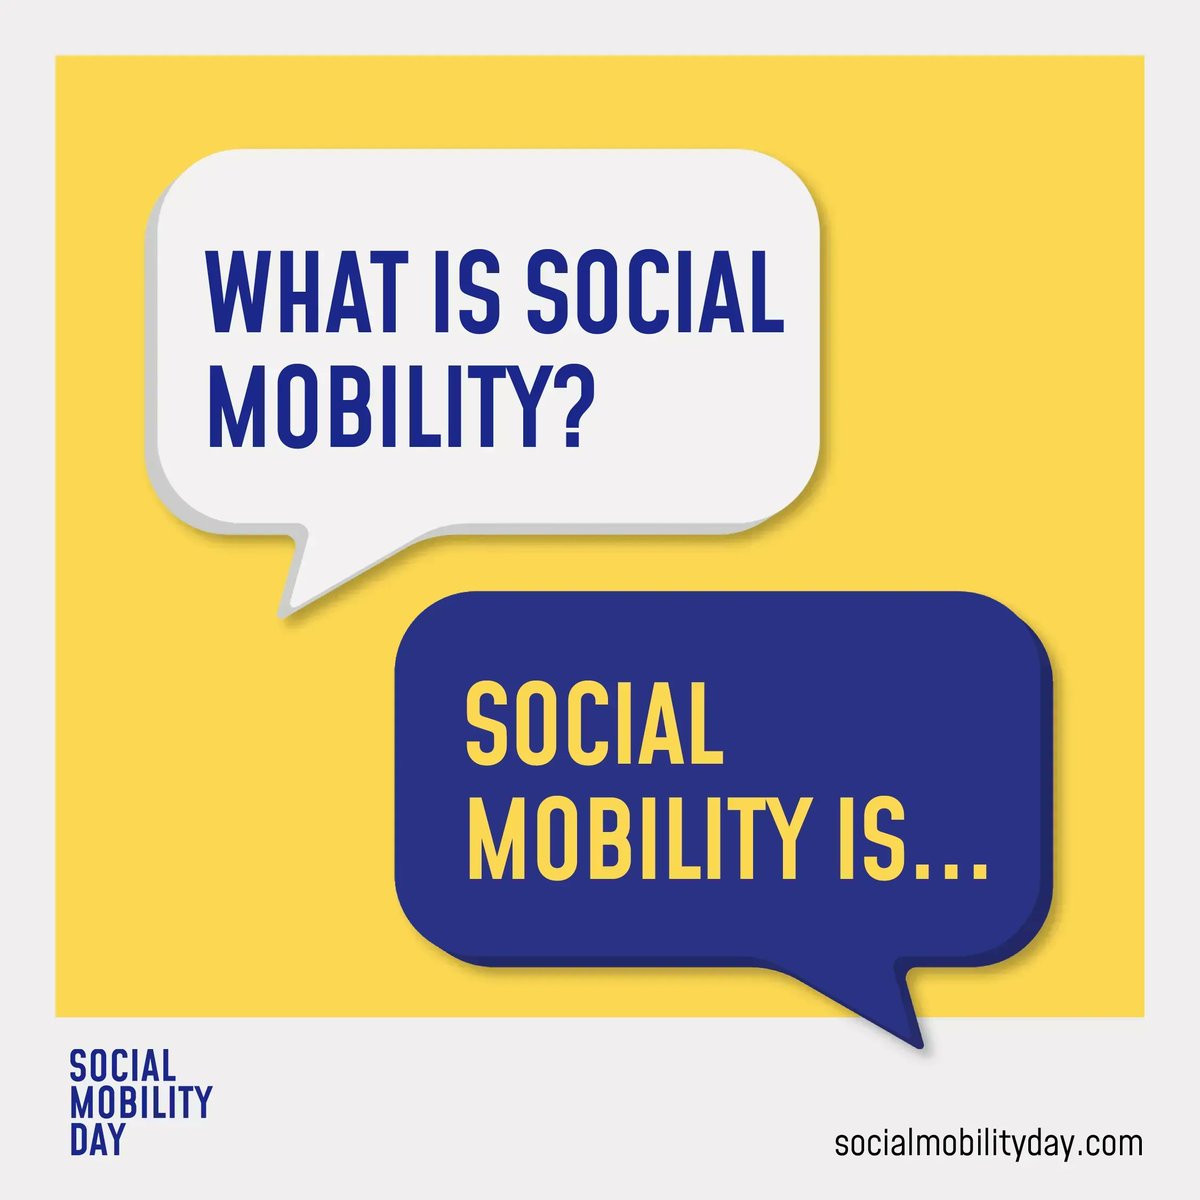 Today is #SocialMobilityDay 🎺 @SocialMobDay 

Social mobility is about ensuring the opportunities open to a person are not dependent on the position they were born into.

Opportunity should be available no matter who your parents are, what school you go to or where you live.